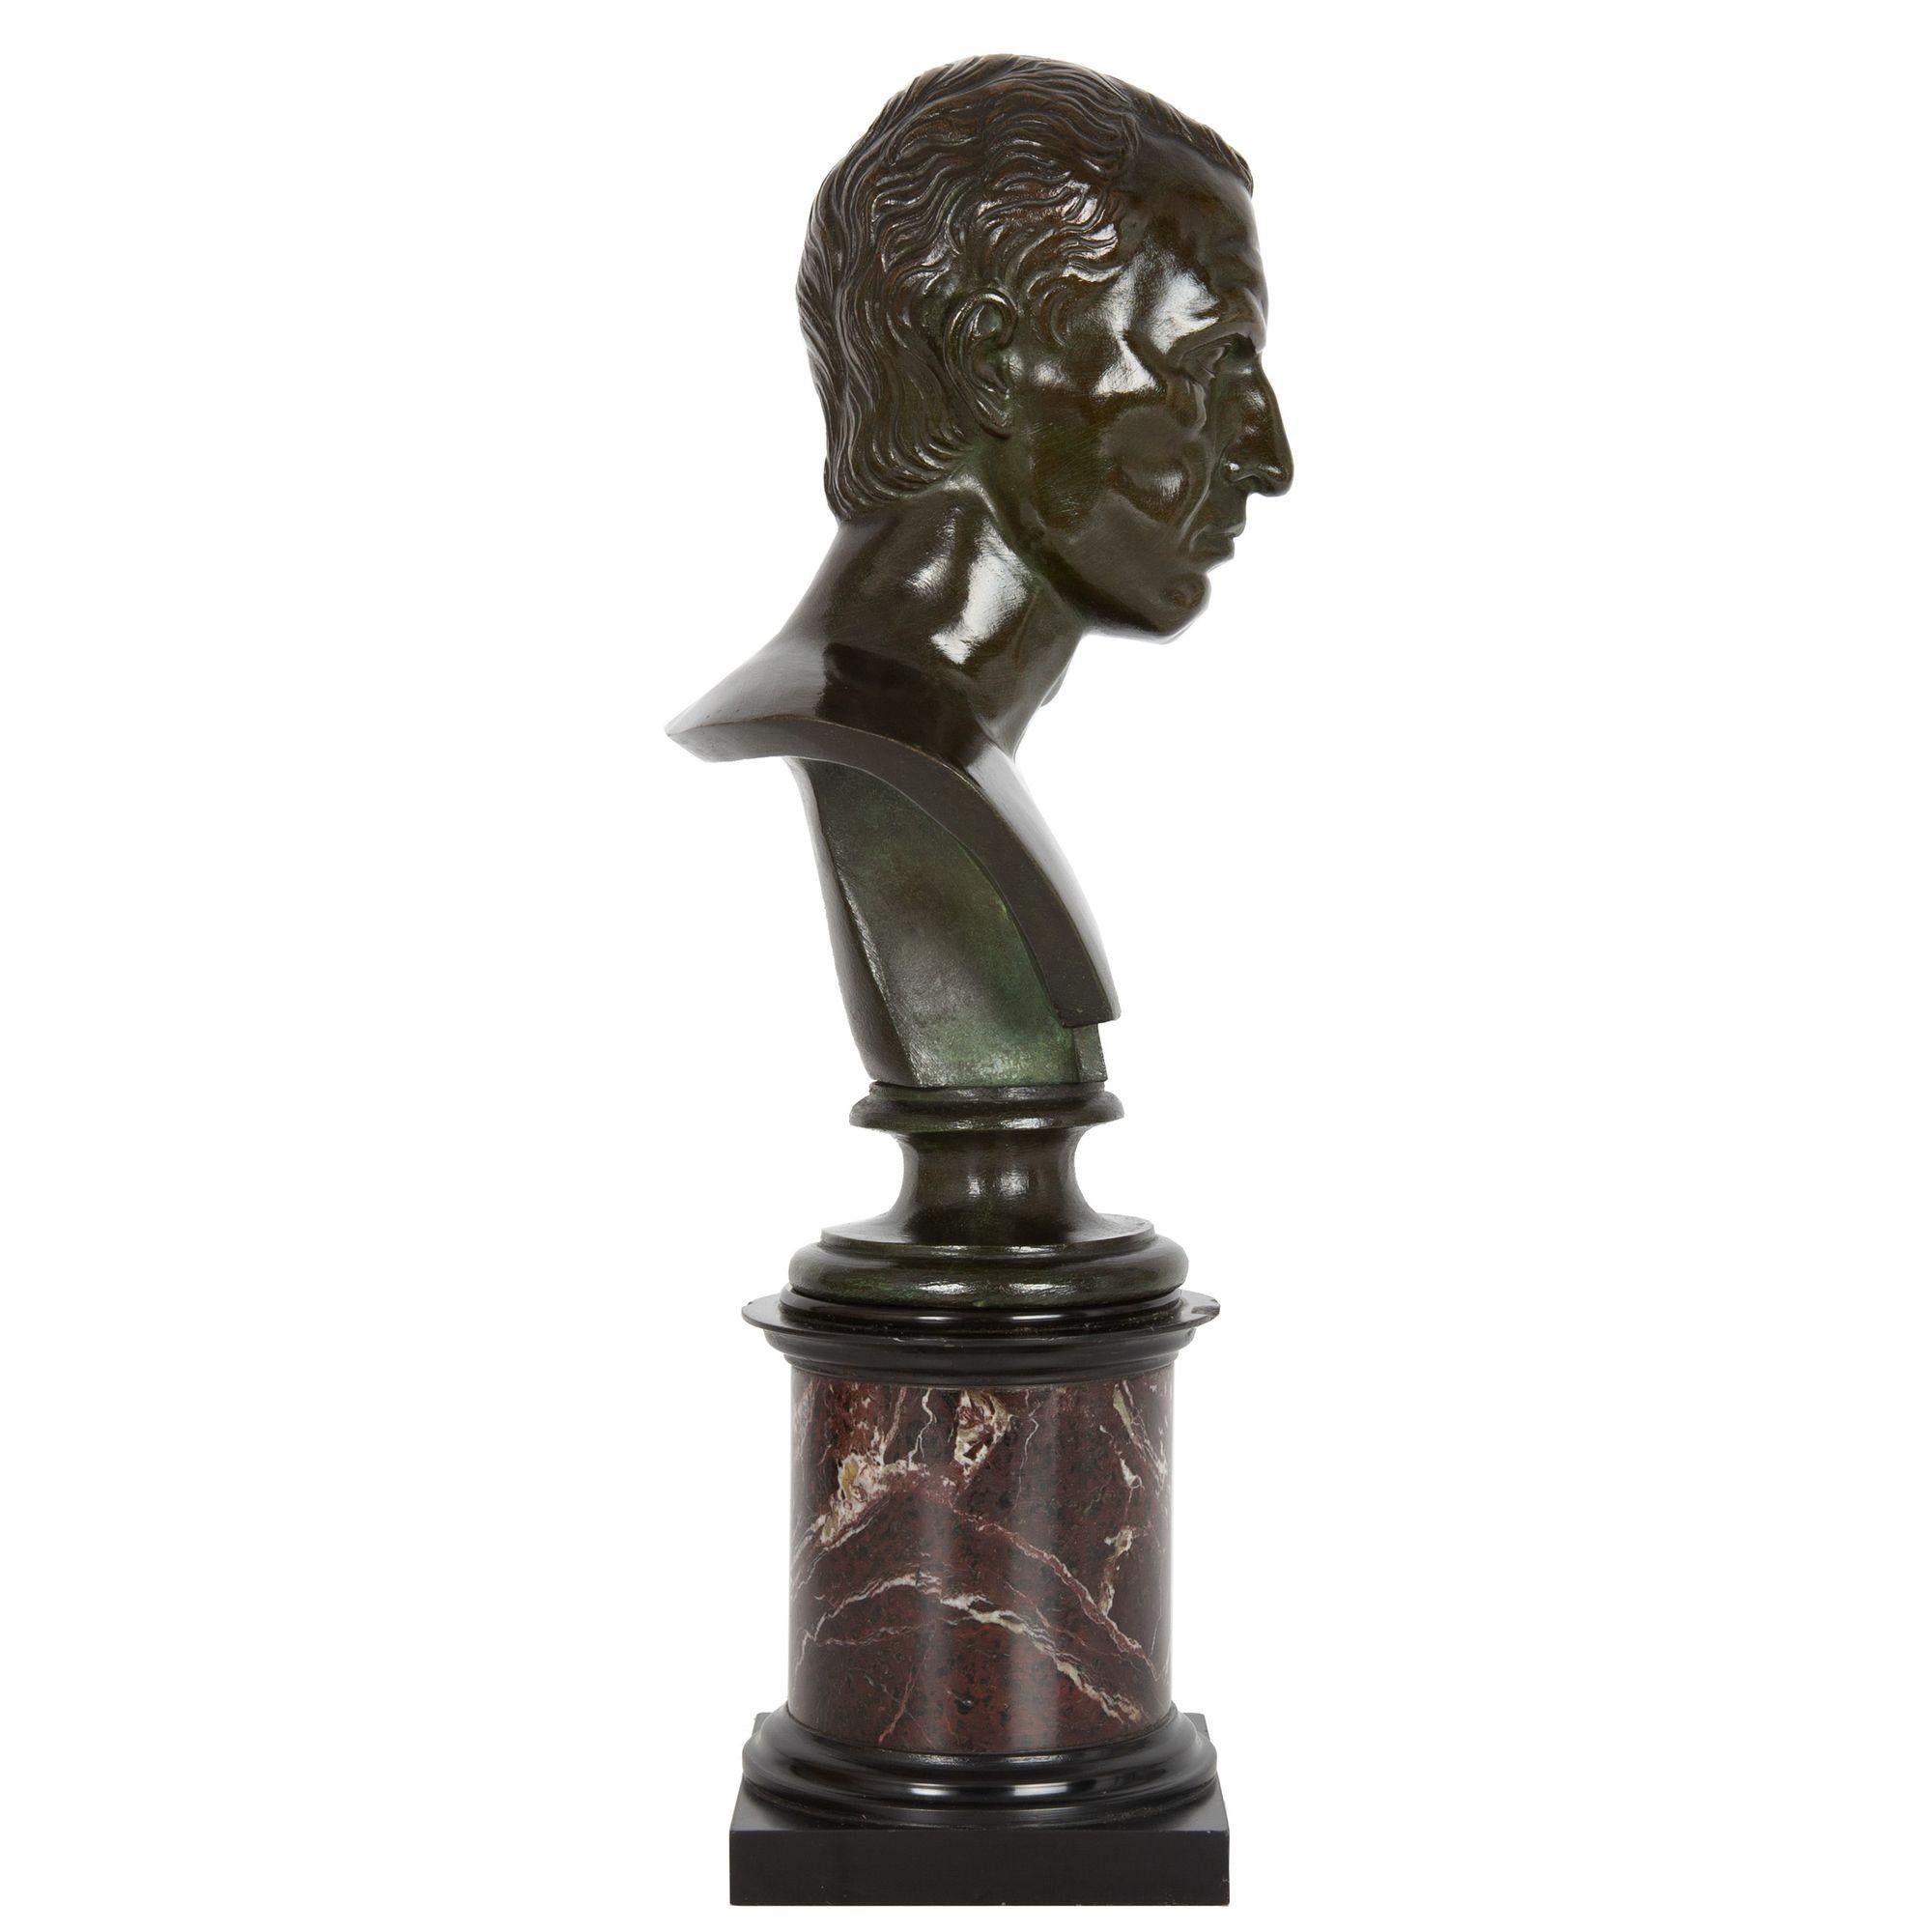 GRAND TOUR
Italian, 19th century

Bust of Julius Caesar

Patinated and pigmented sand-cast bronze over Violet Breche marble socle  unsigned

Item # 212WHZ09P 

A finely cast and beautifully patinated bust of Julius Caesar, it likely originates from